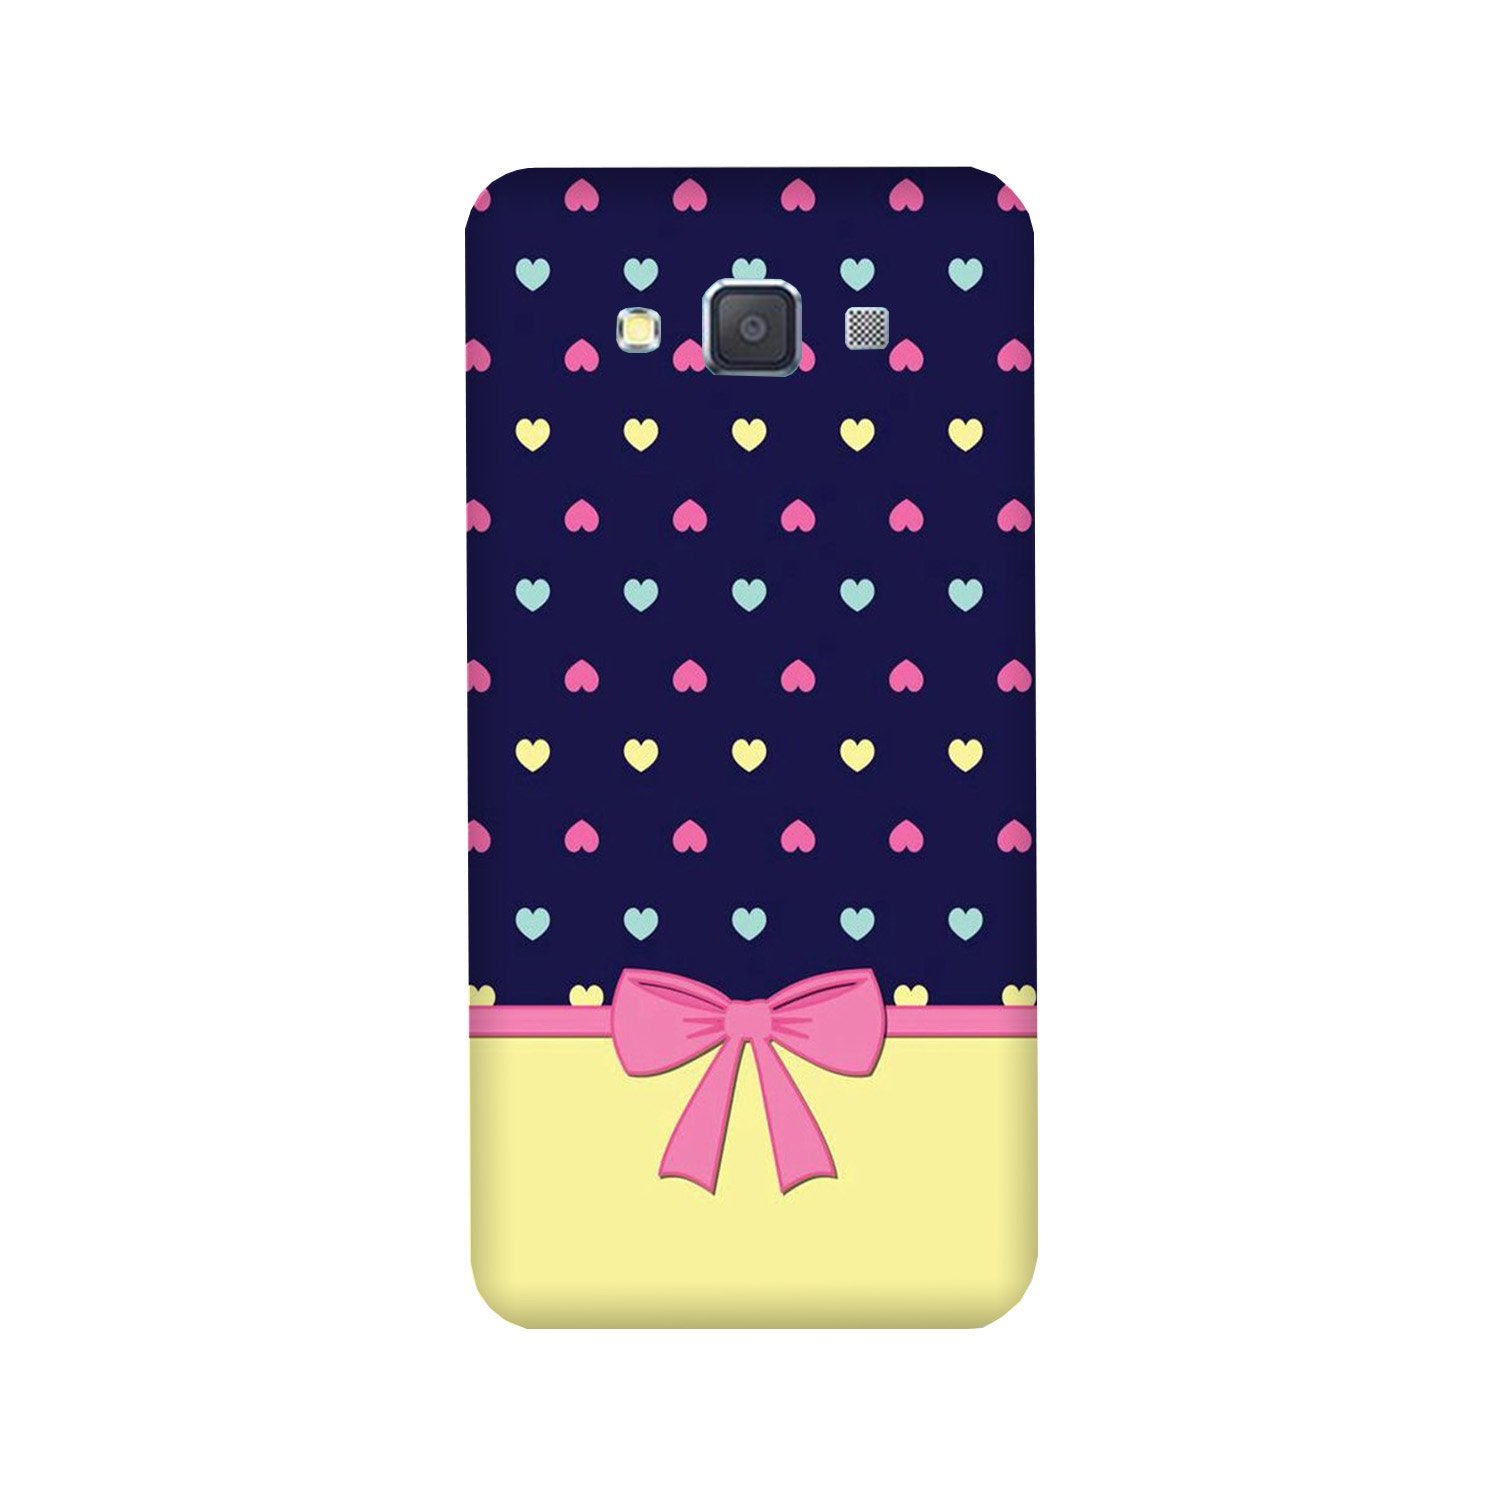 Gift Wrap5 Case for Galaxy ON7/ON7 Pro